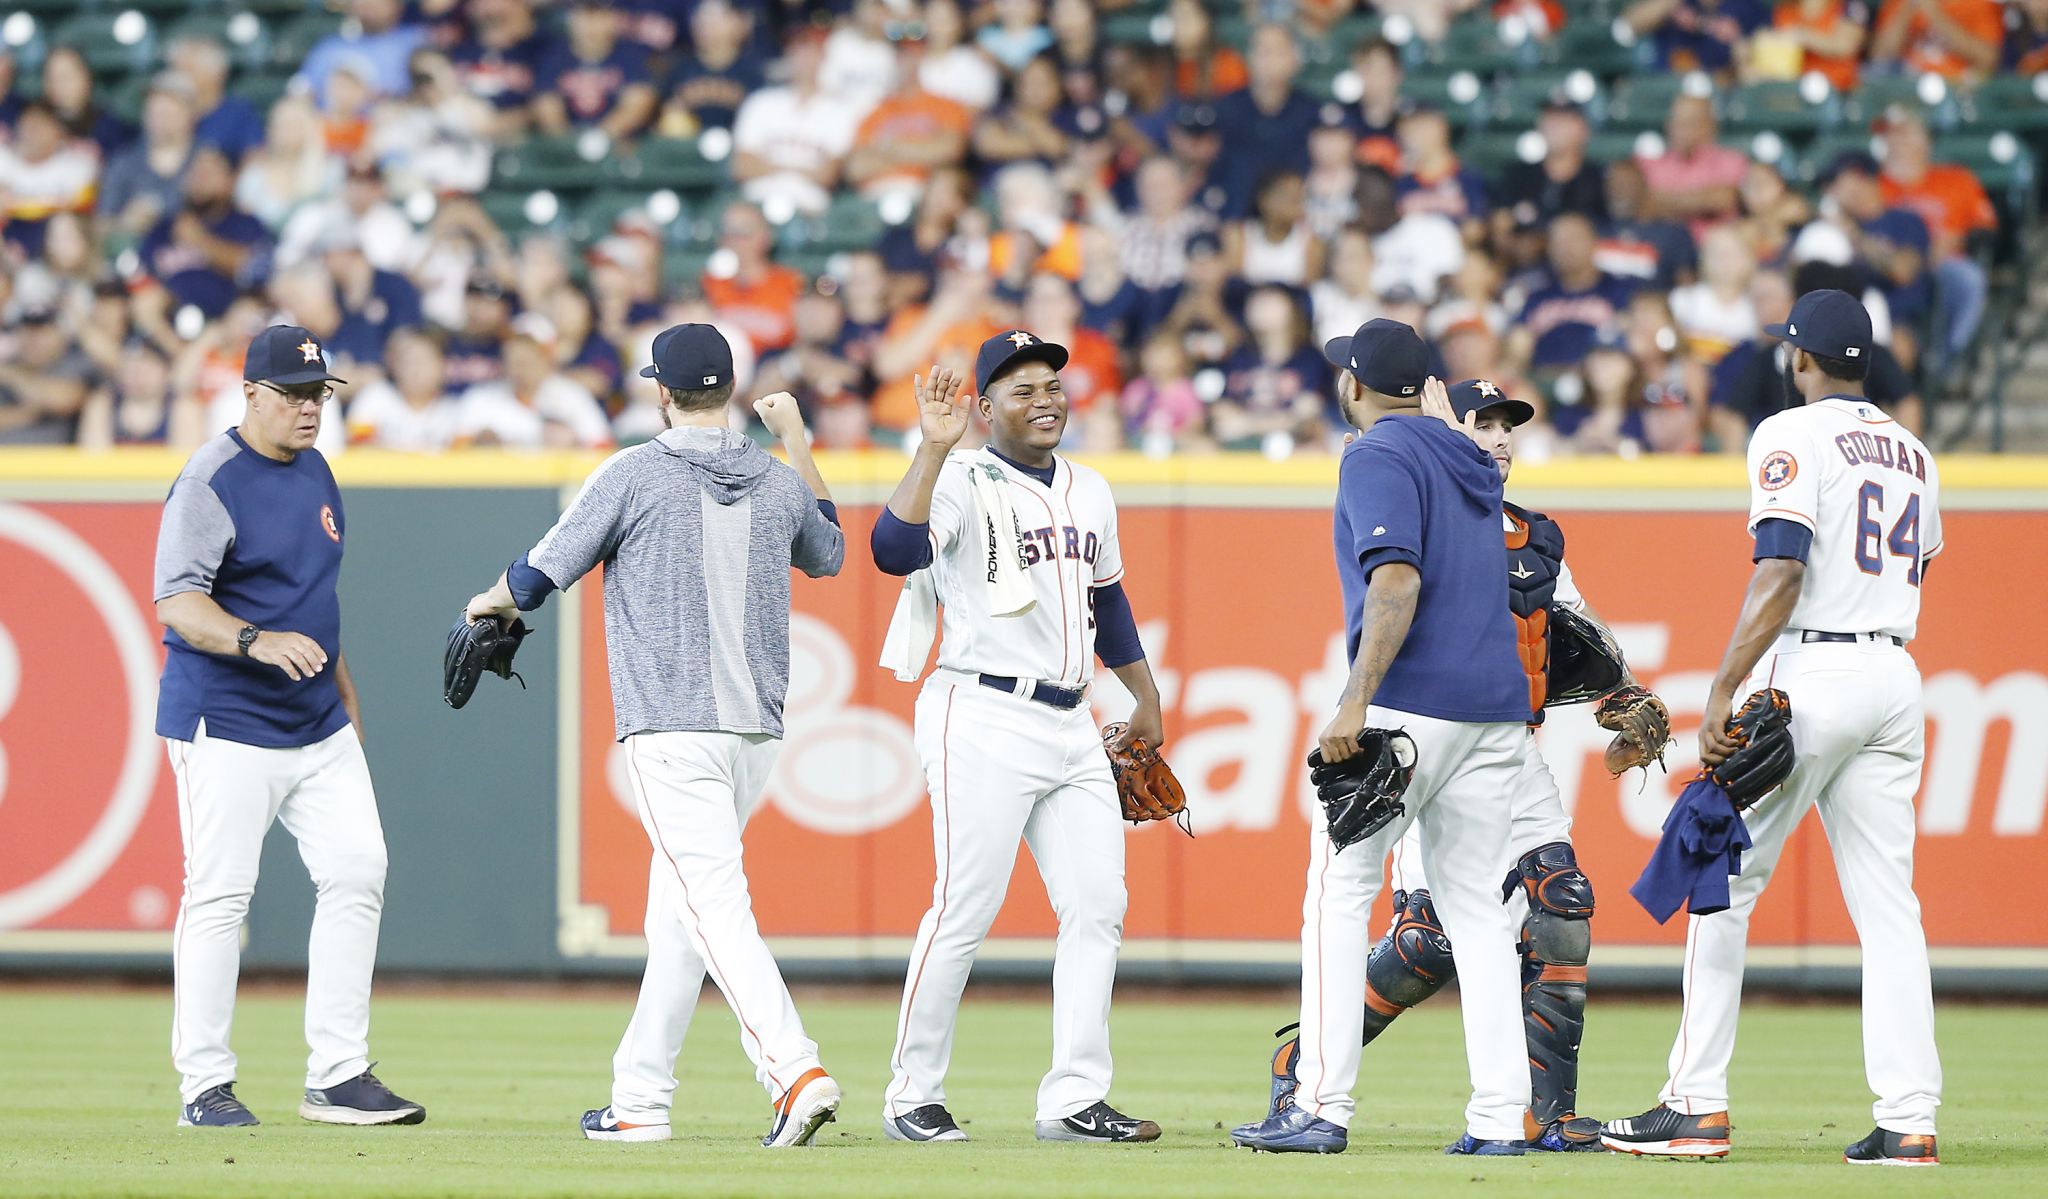 Who could the Astros' opener be?